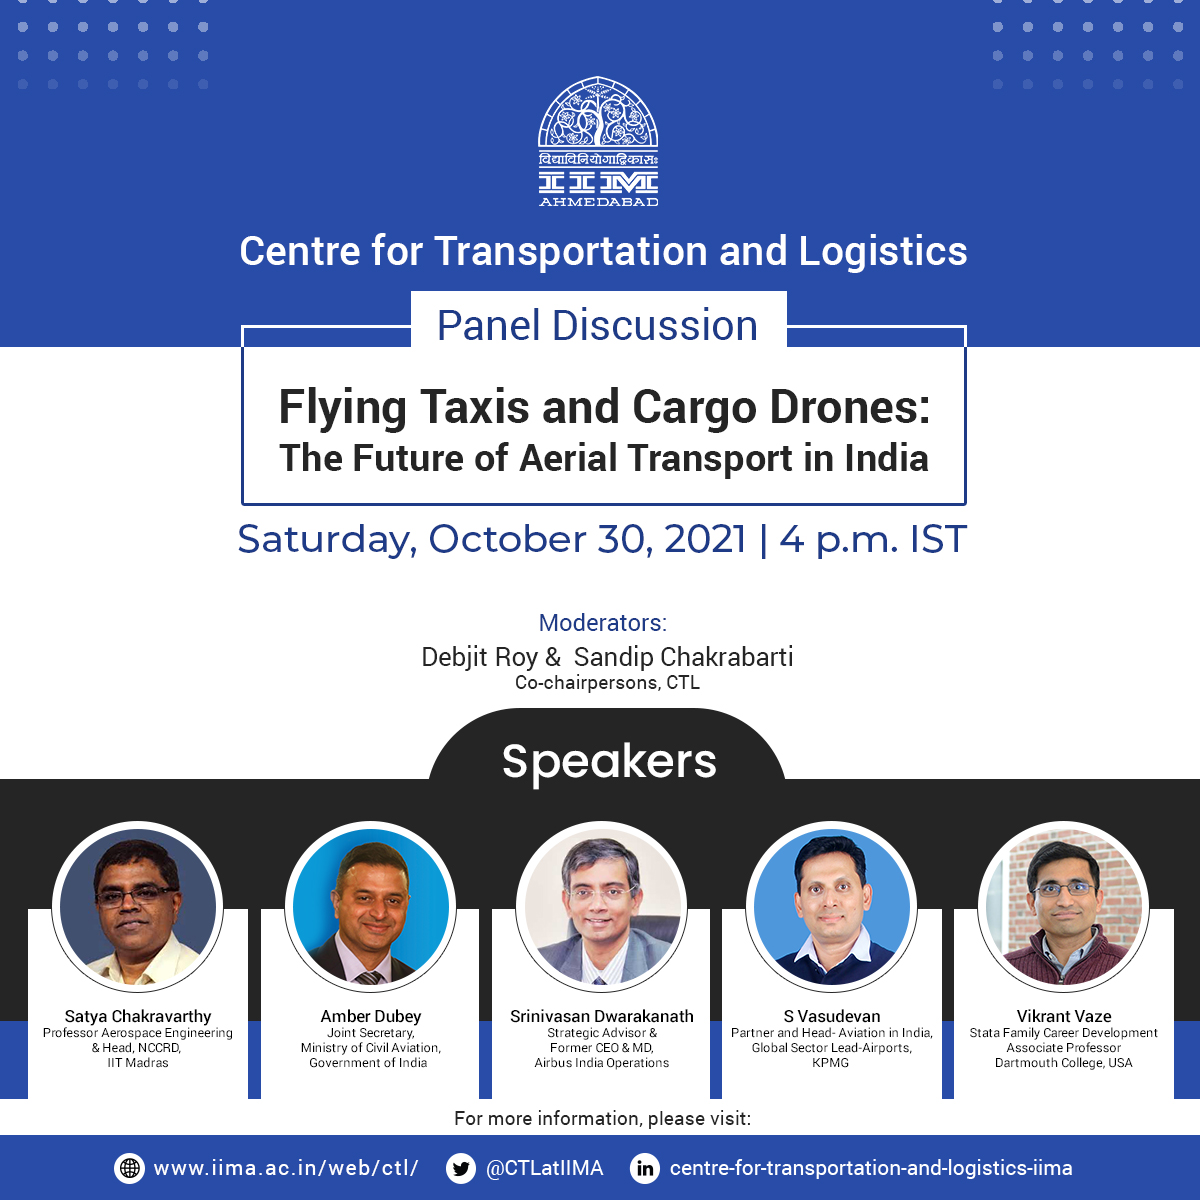 Flying Taxis and Cargo Drones: The Future of Aerial Transport in India